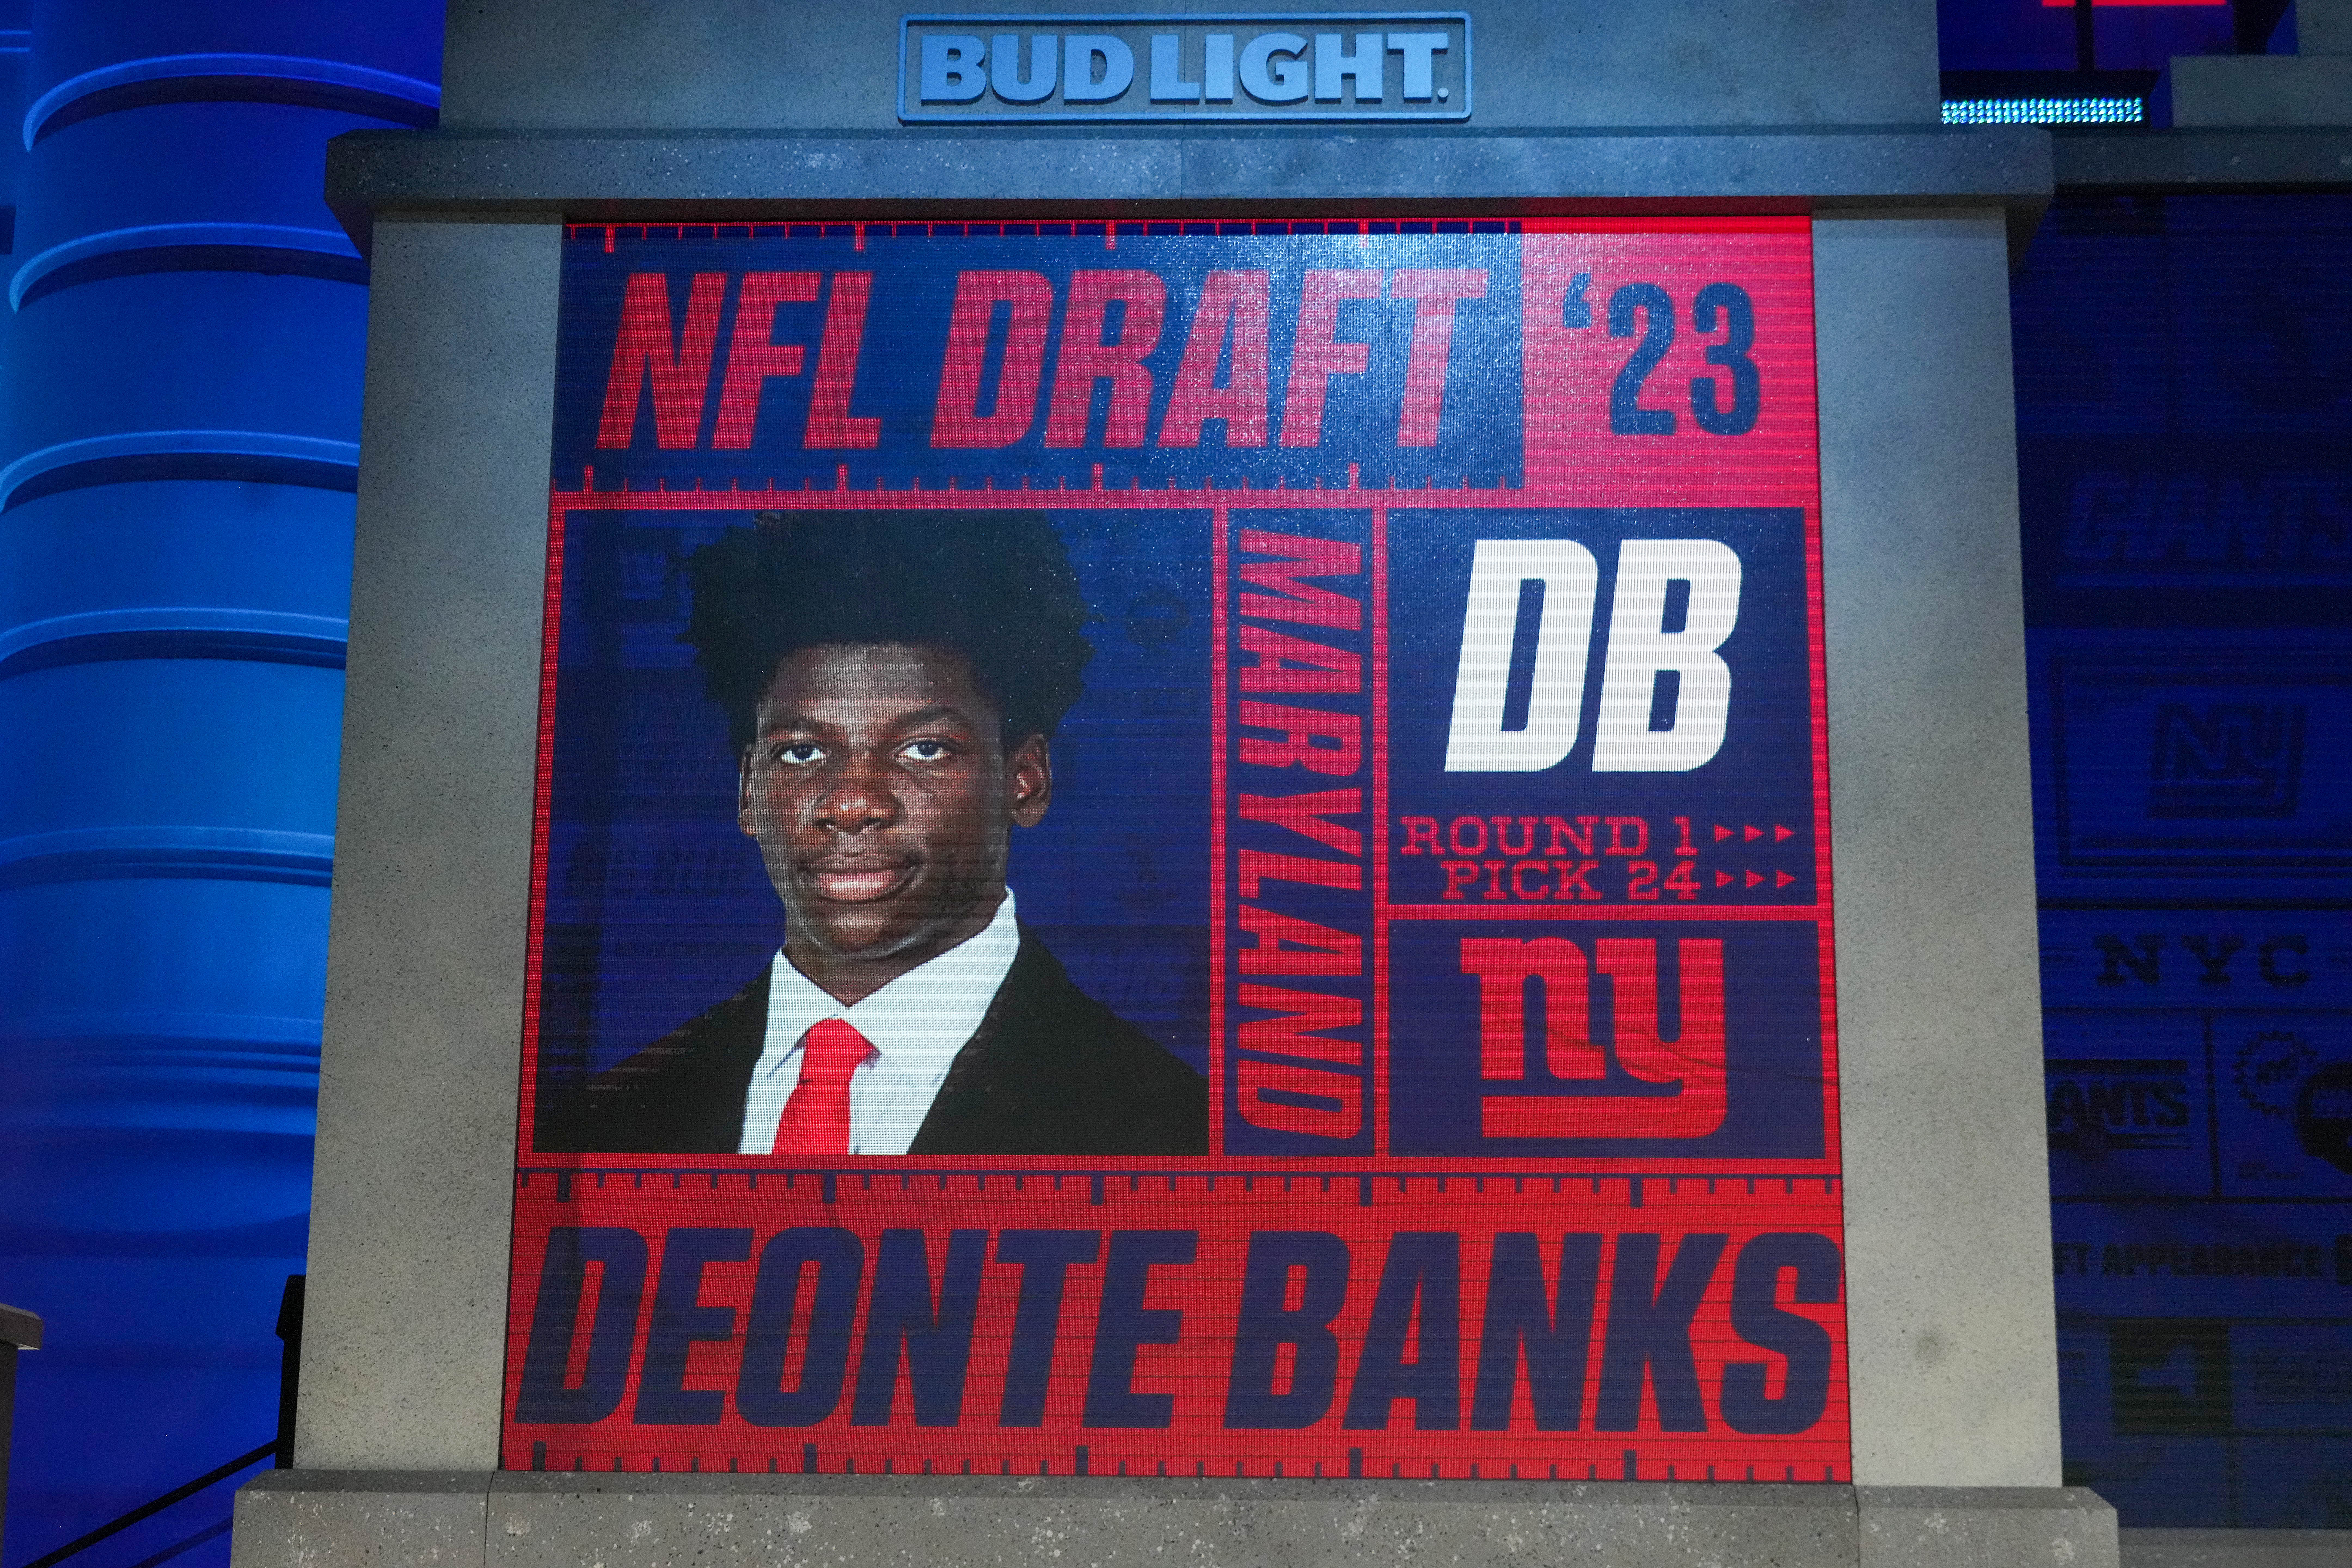 Maryland defensive back Deonte Banks after being selected by the New York Giants twenty fourth overall in the first round of the 2023 NFL Draft at Union Station.